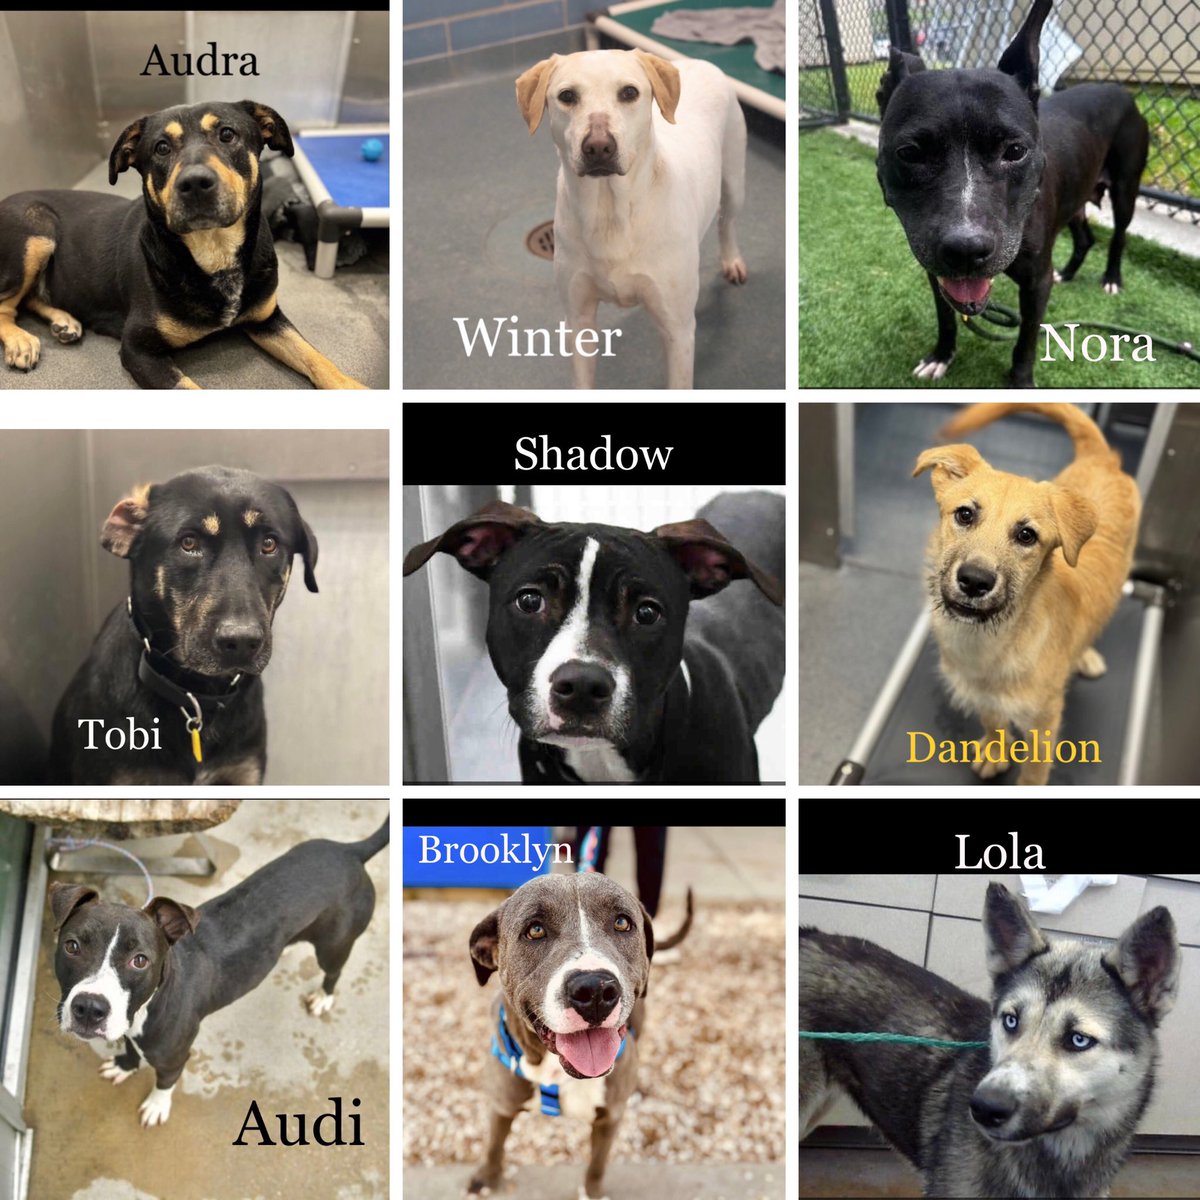 These 9 wonderful pups in Dallas TX are kill listed & desperately waiting for rescues, fosters or adopters. Each of them are beautiful souls who will make wonderful family companions. Pls SHARE & pledge. No amount is too small. Let’s save these precious pups! Transport available!